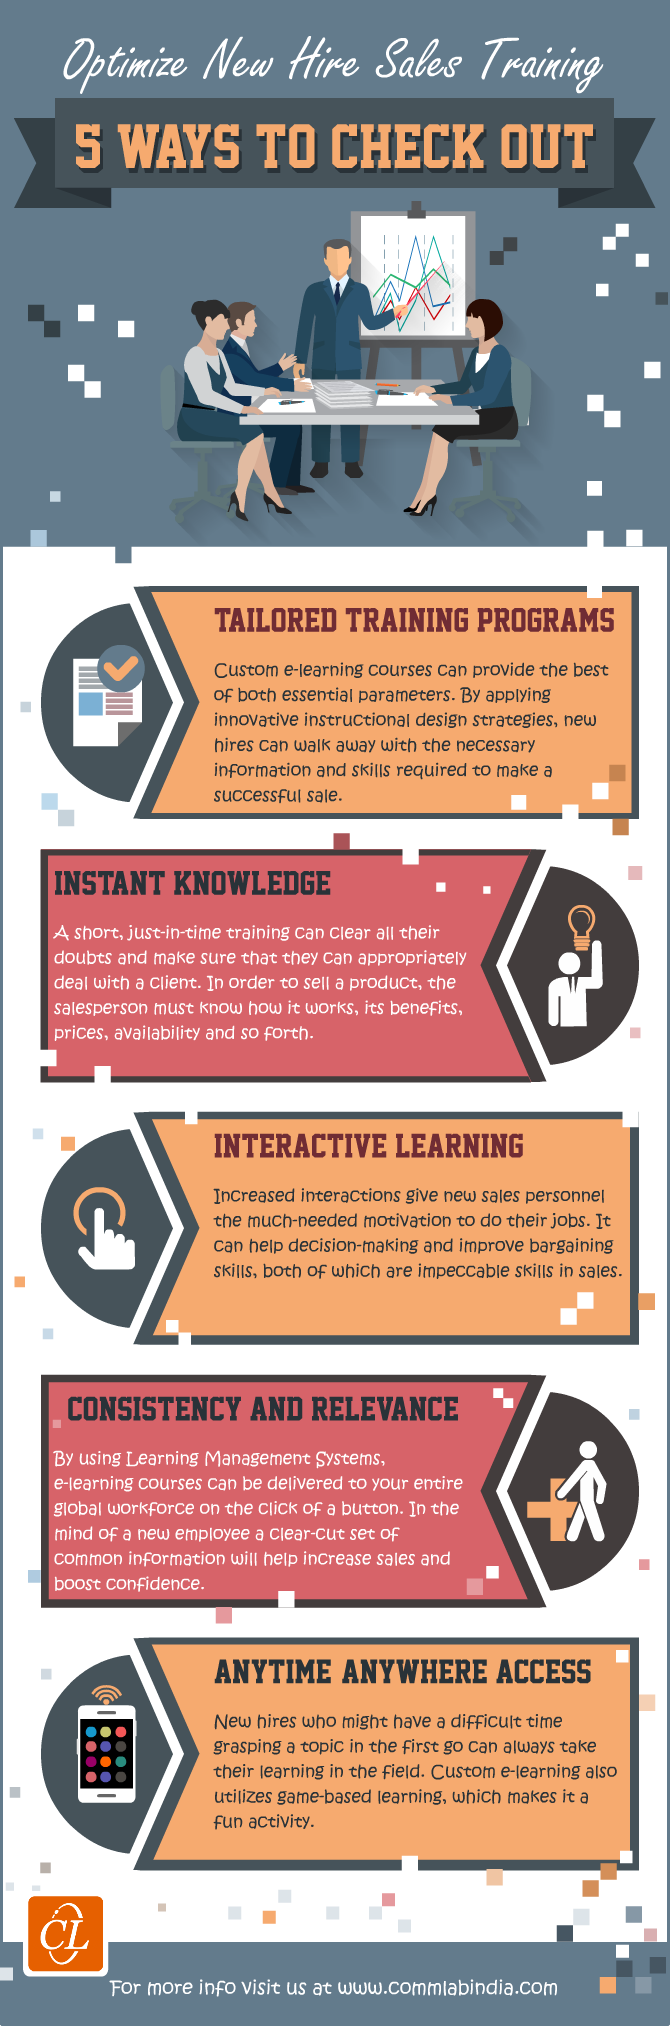 Optimize New Hire Sales Training - 5 Ways to Check [Infographic]